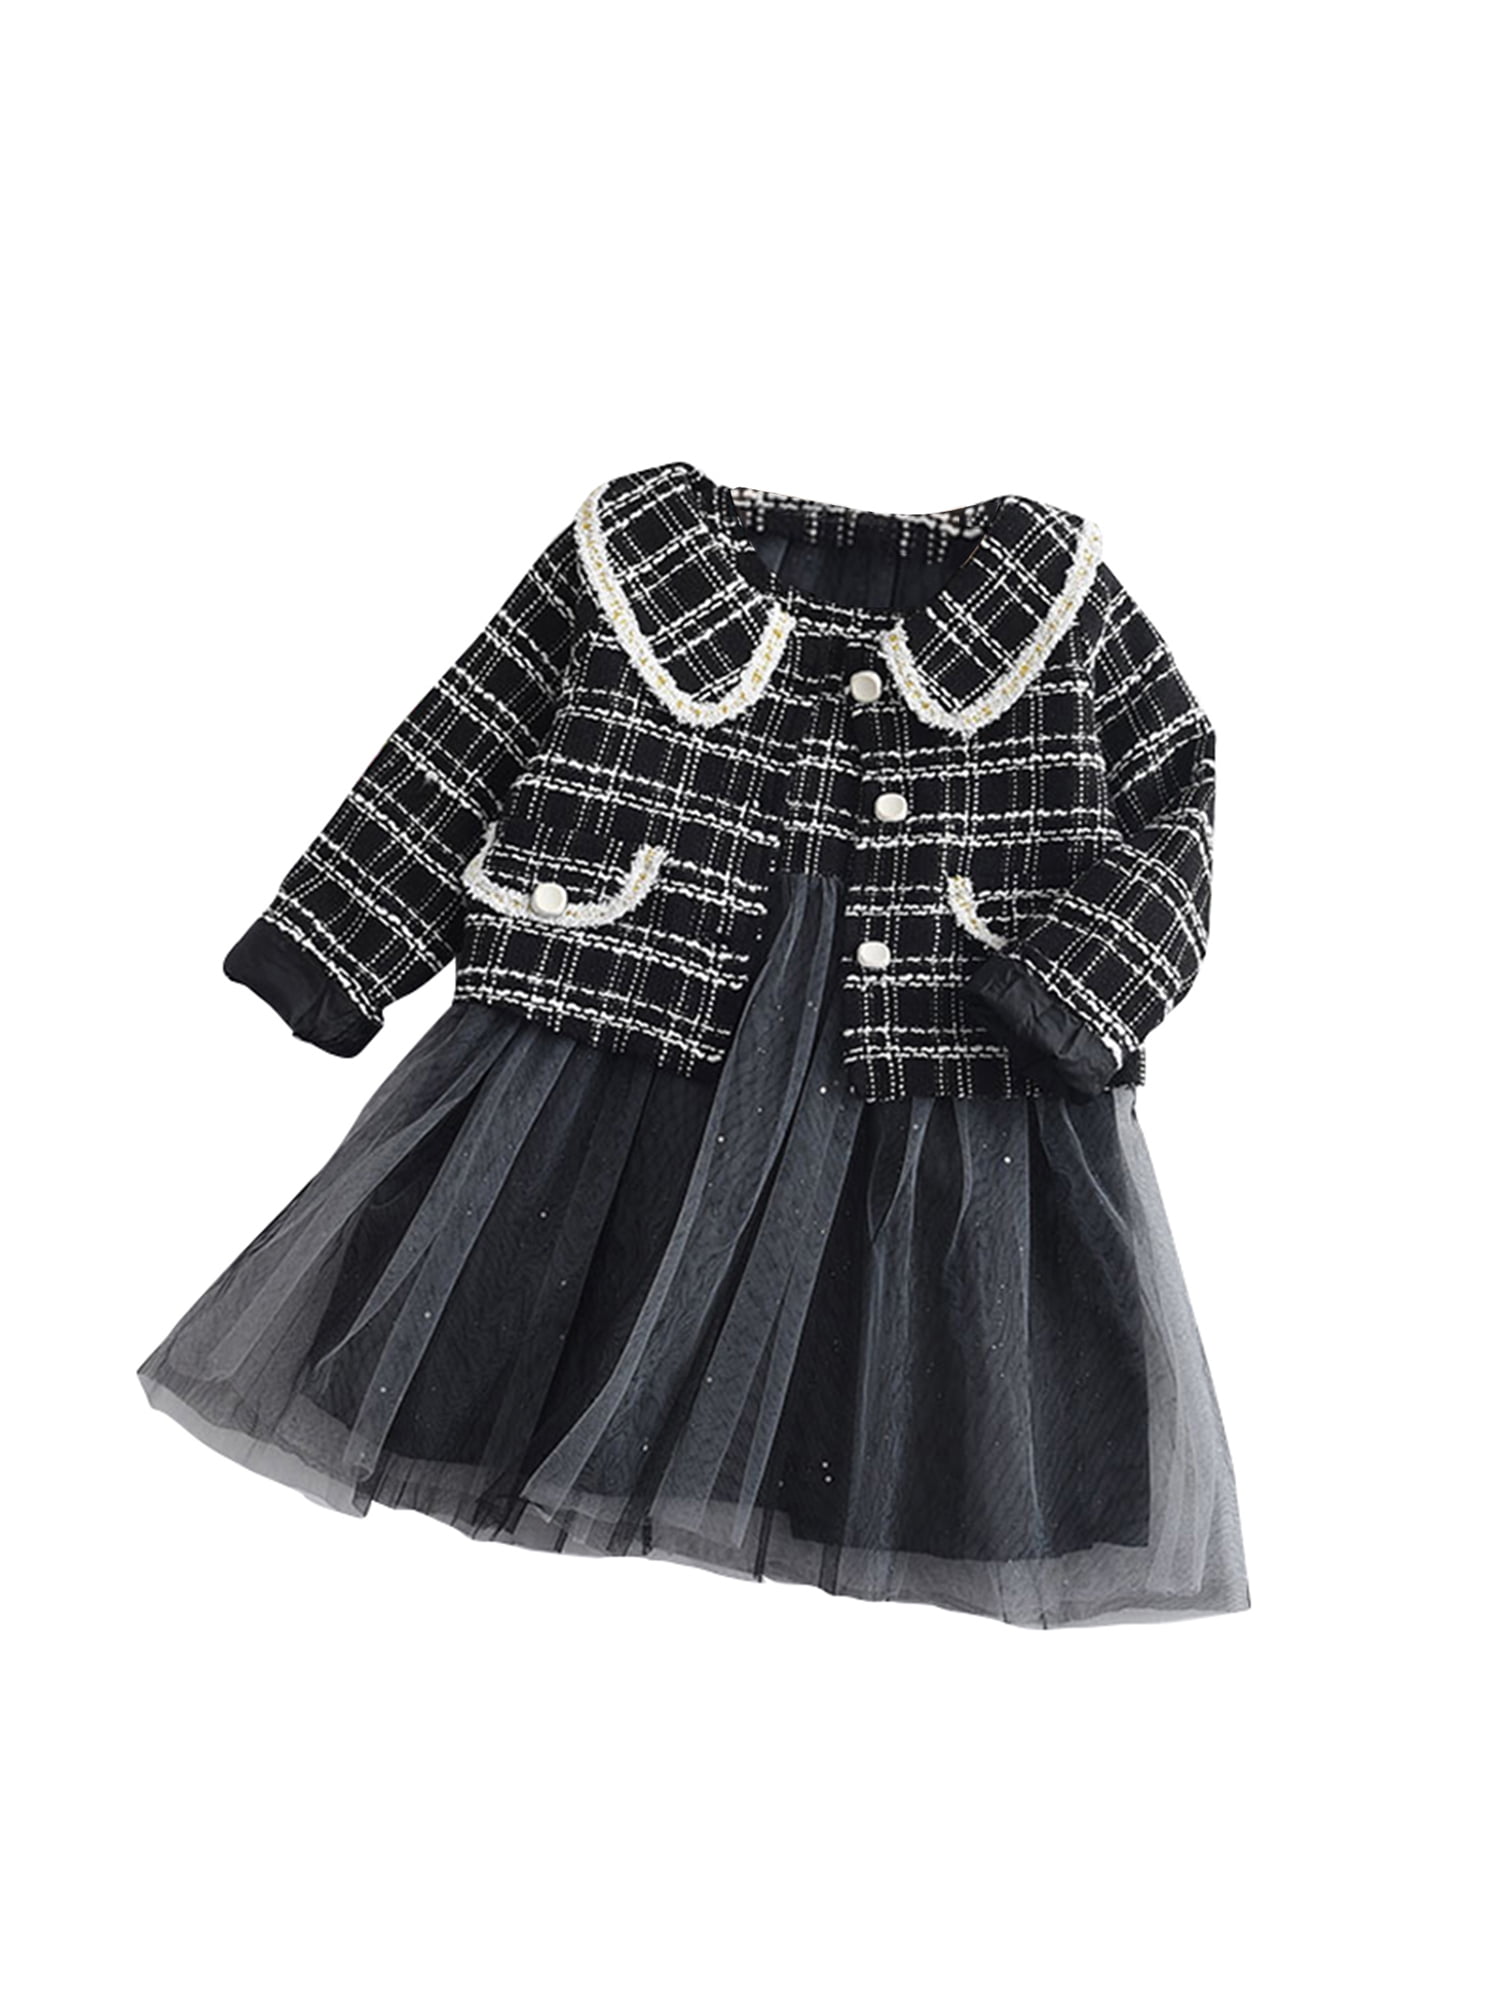 Toddler Baby Girl Plaid Skirt Set Long Sleeve Jacket Coat Tops Party Dress Tutu Skirt Fall Outfit Clothes 